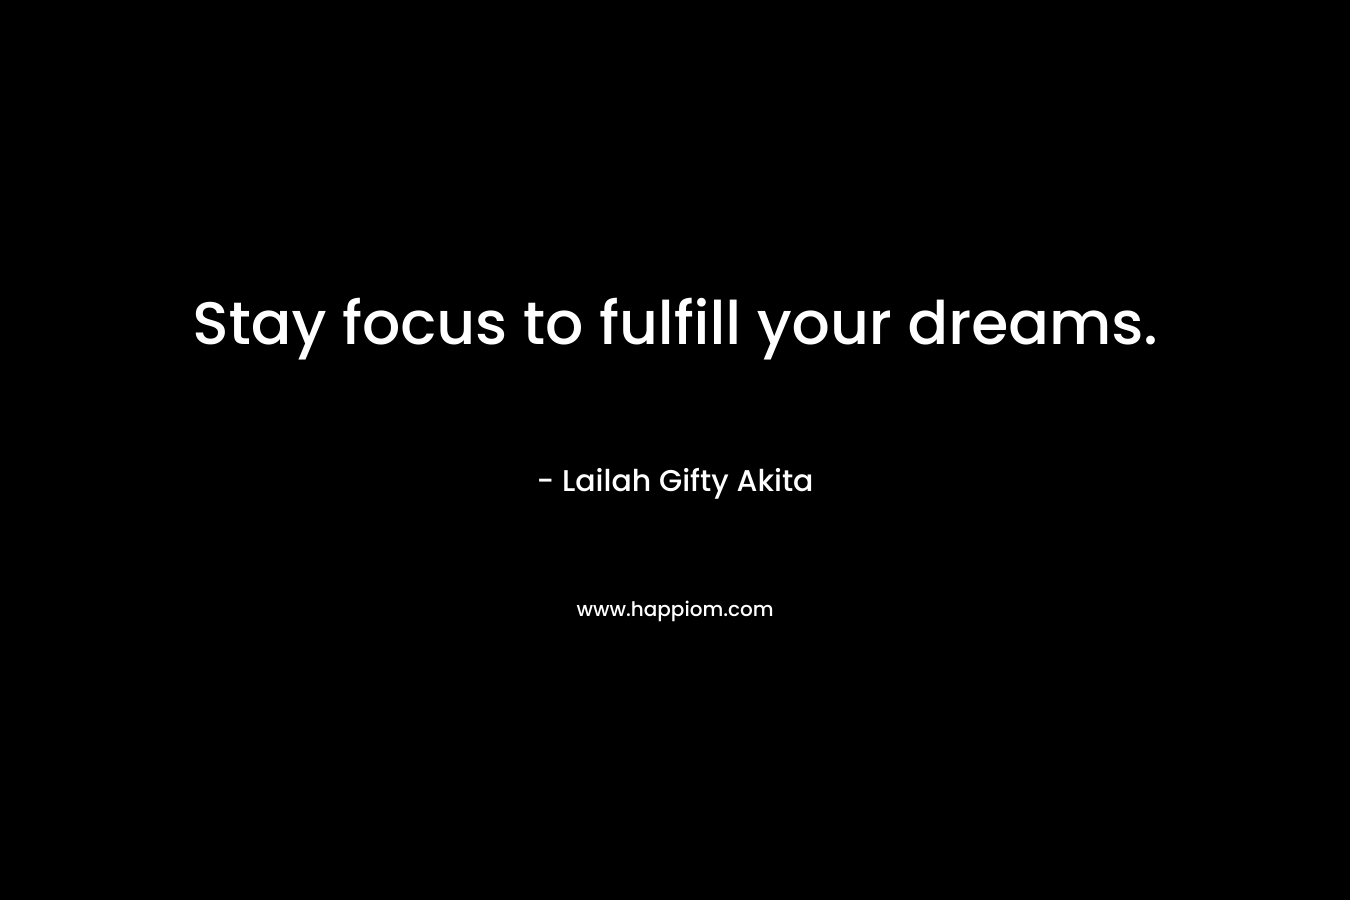 Stay focus to fulfill your dreams.